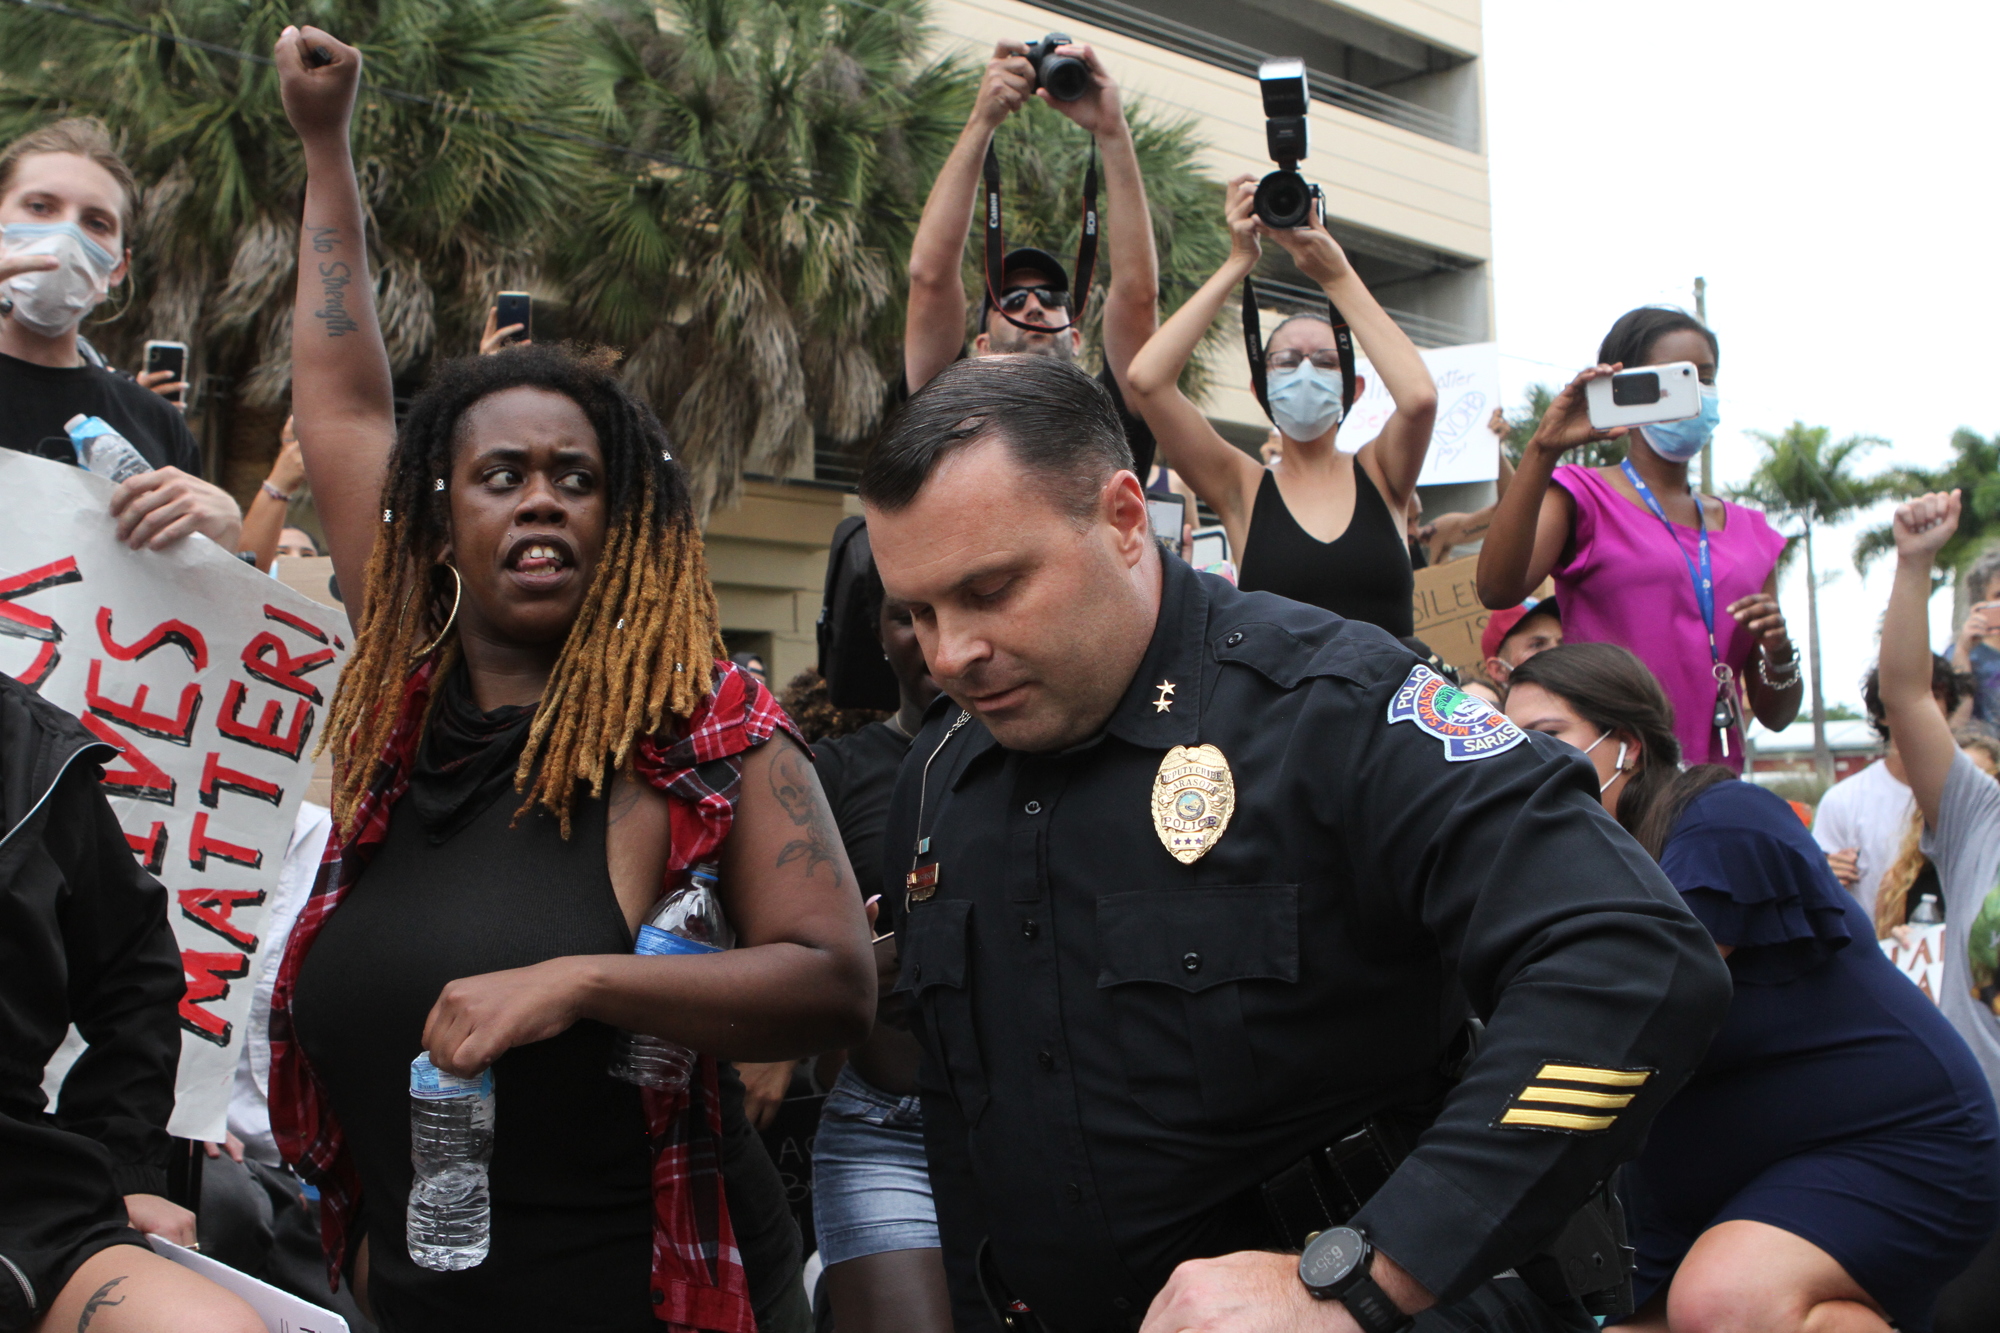 Deputy Police Chief Pat Robinson took a knee alongside protesters during a demonstration outside the Sarasota Police Station Tuesday, June 2. The police department has said it takes pride in its community engagement efforts.